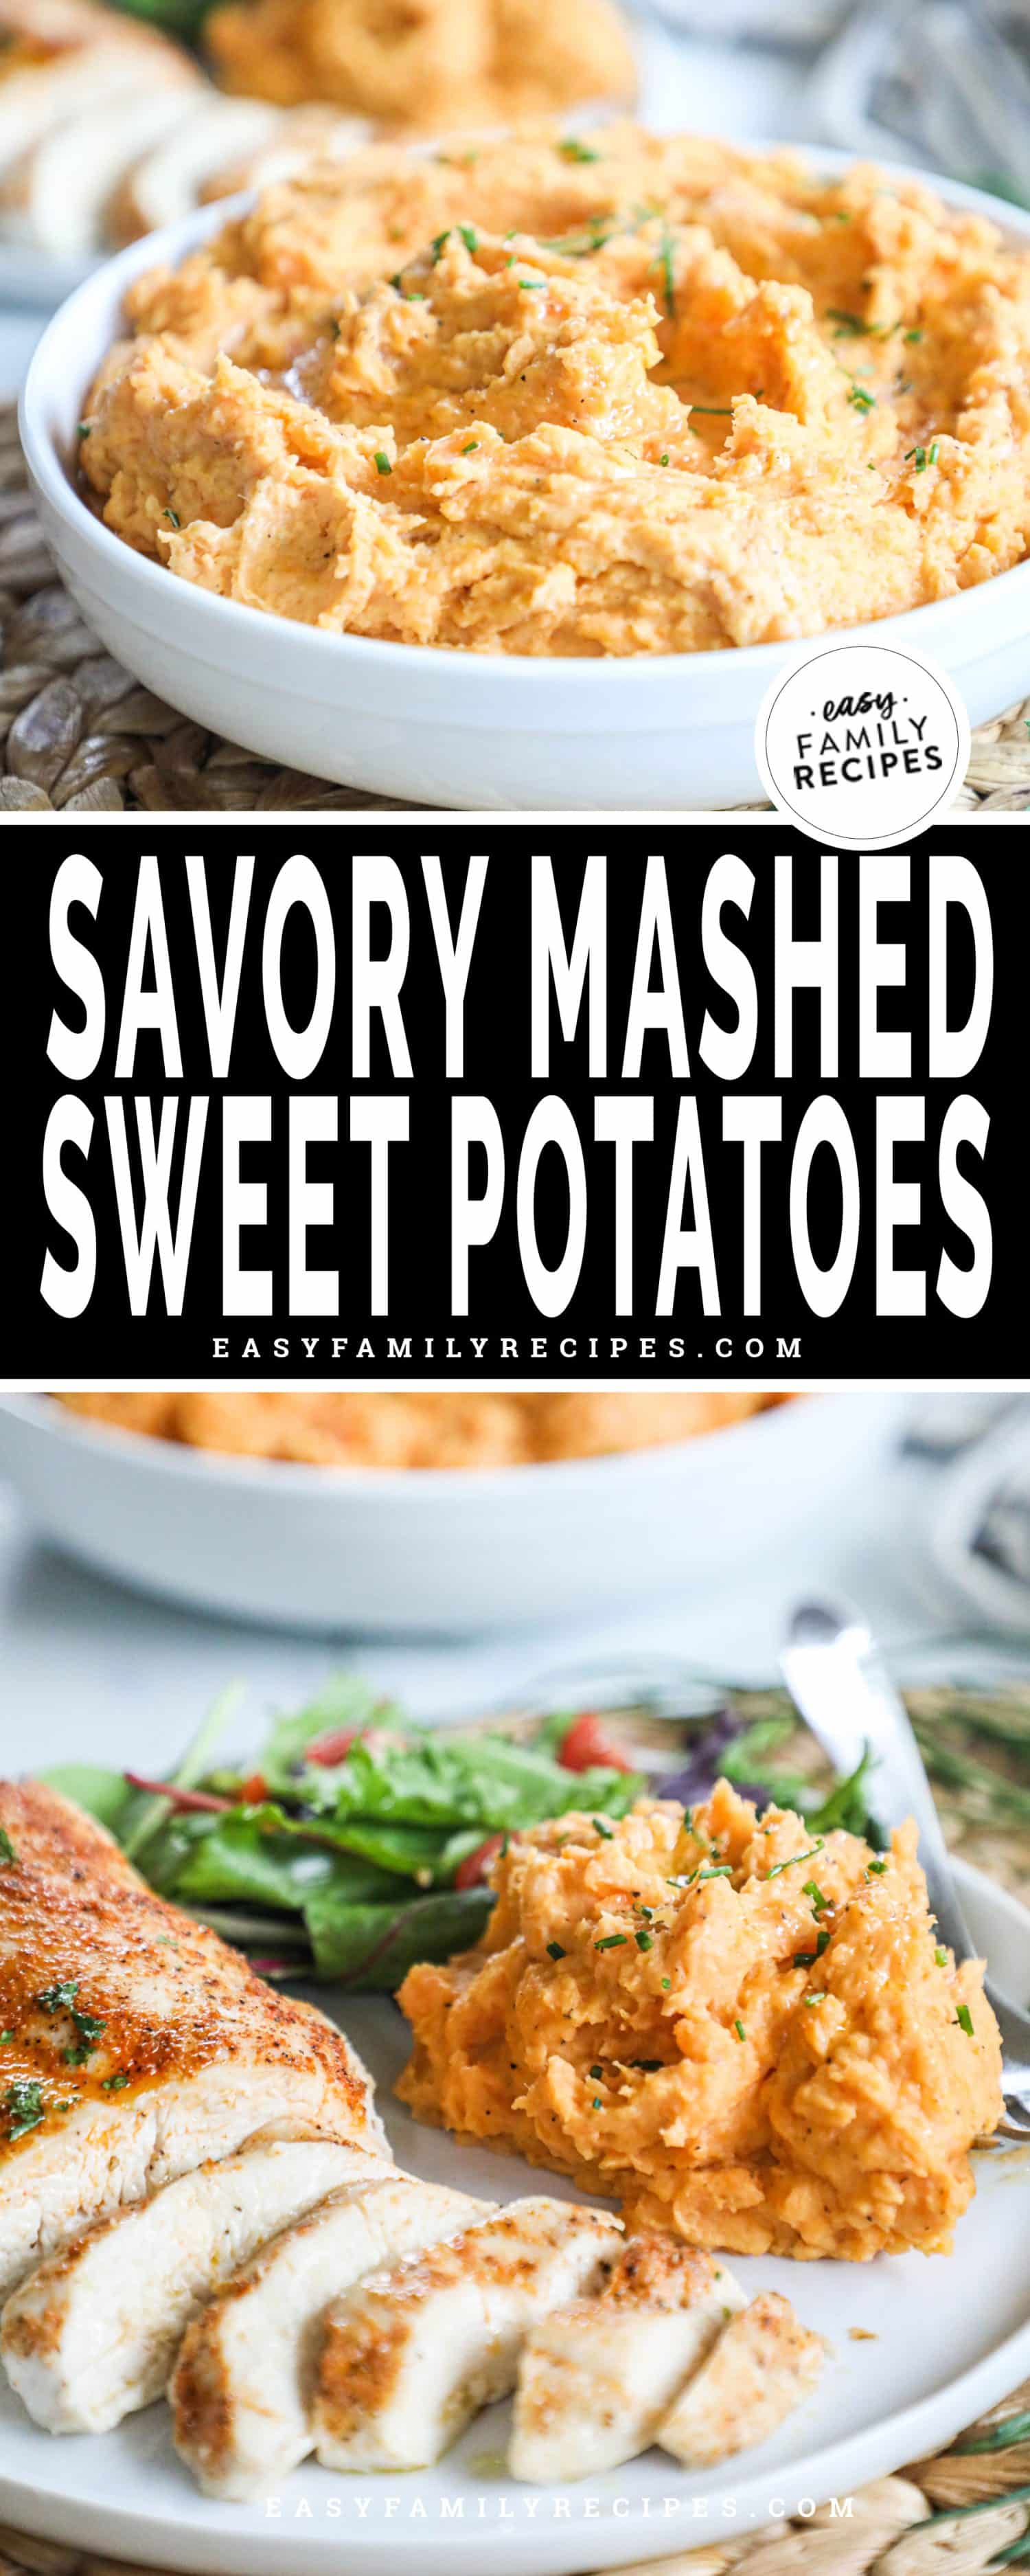 a bowl of savory mashed sweet potatoes and a plate with sweet potatoes, sliced chicken, and a side salad.